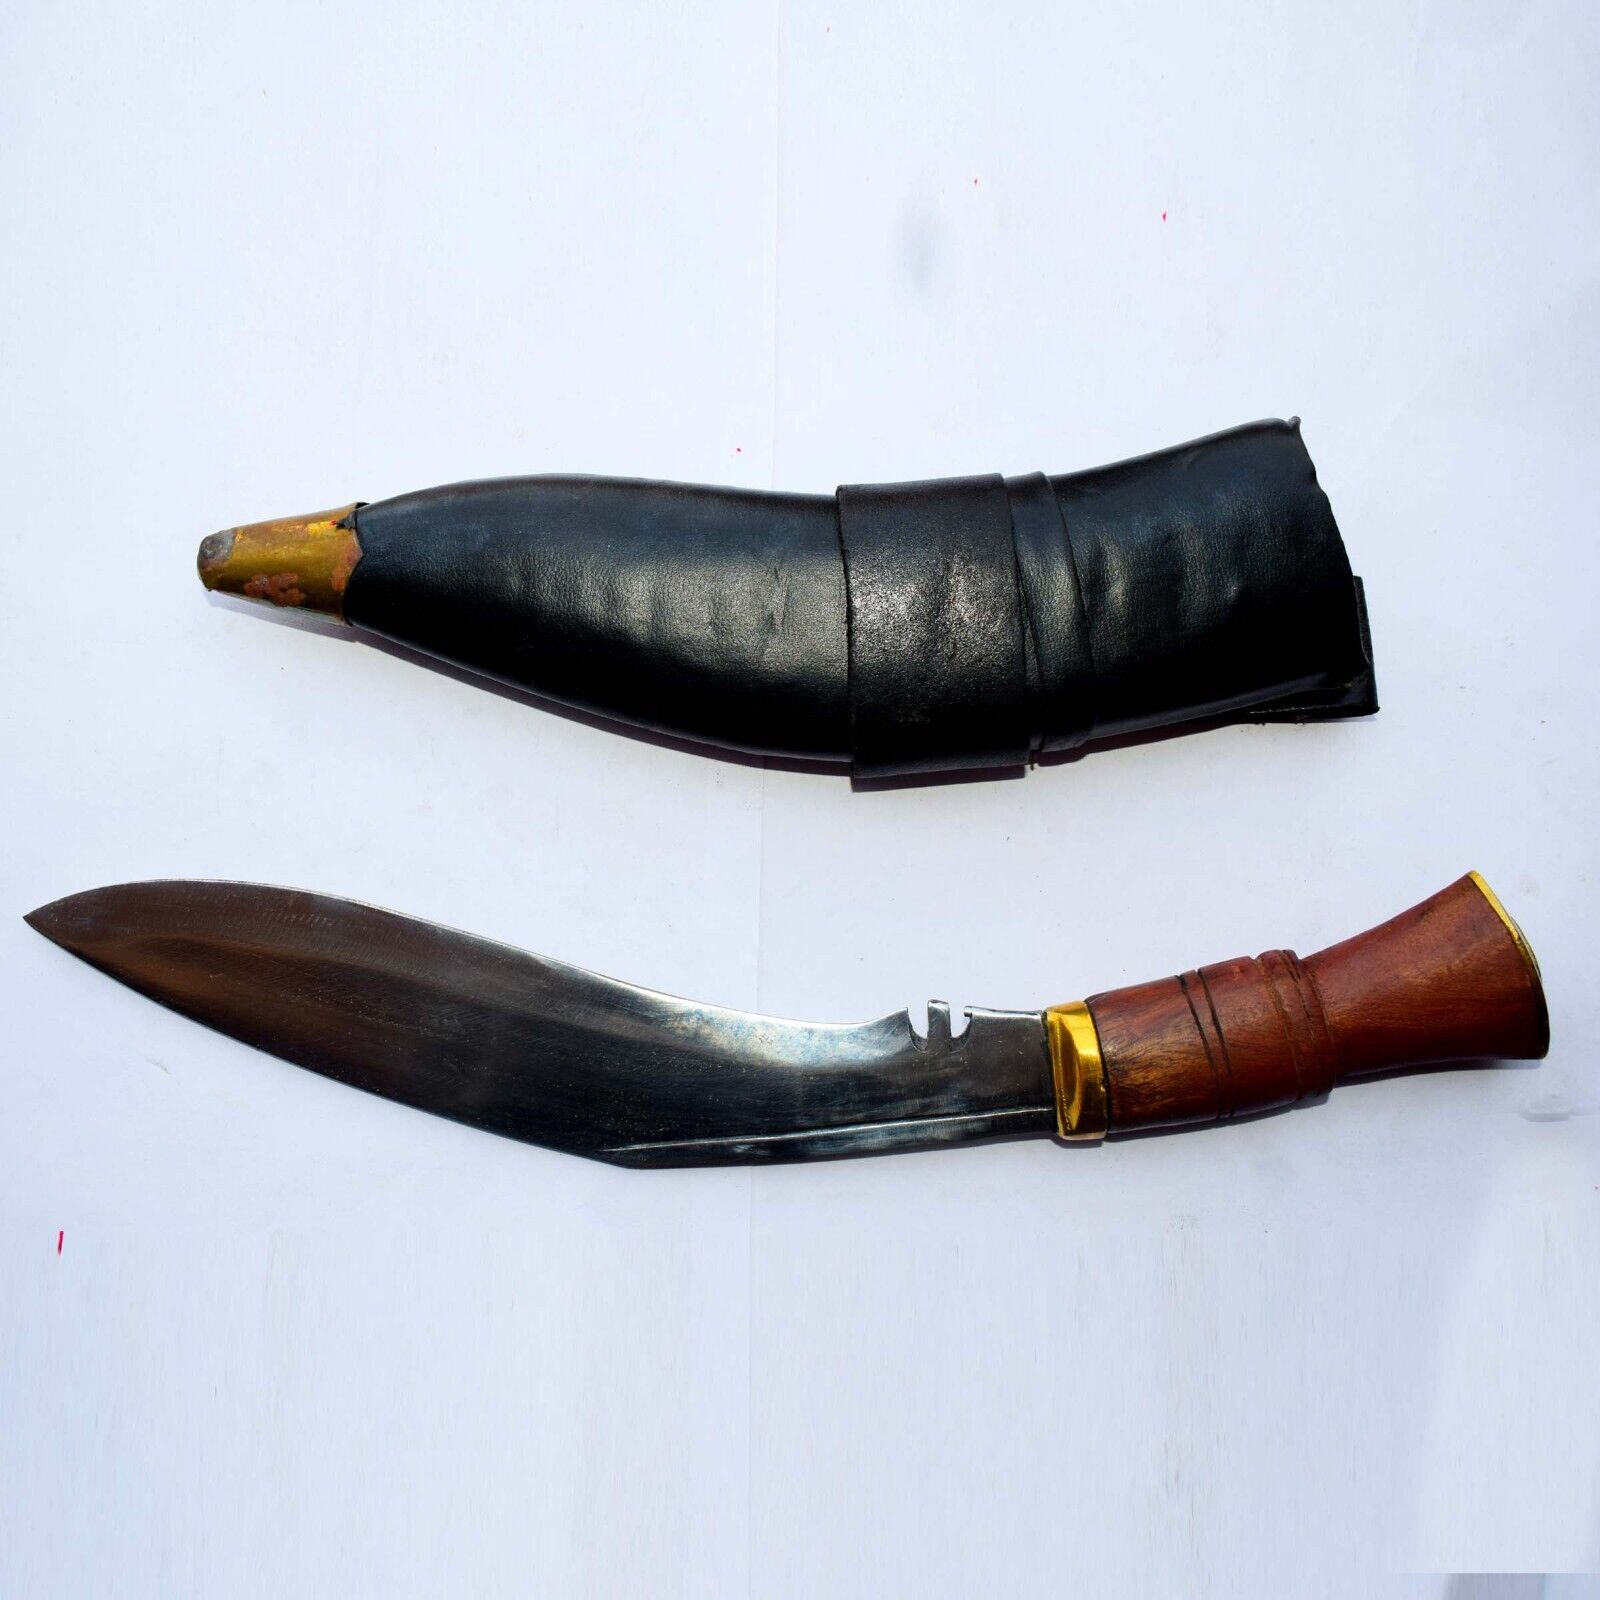 Handcrafted Modern Reproduction Khukri Knife Dagger with Leather Grips - Artisan